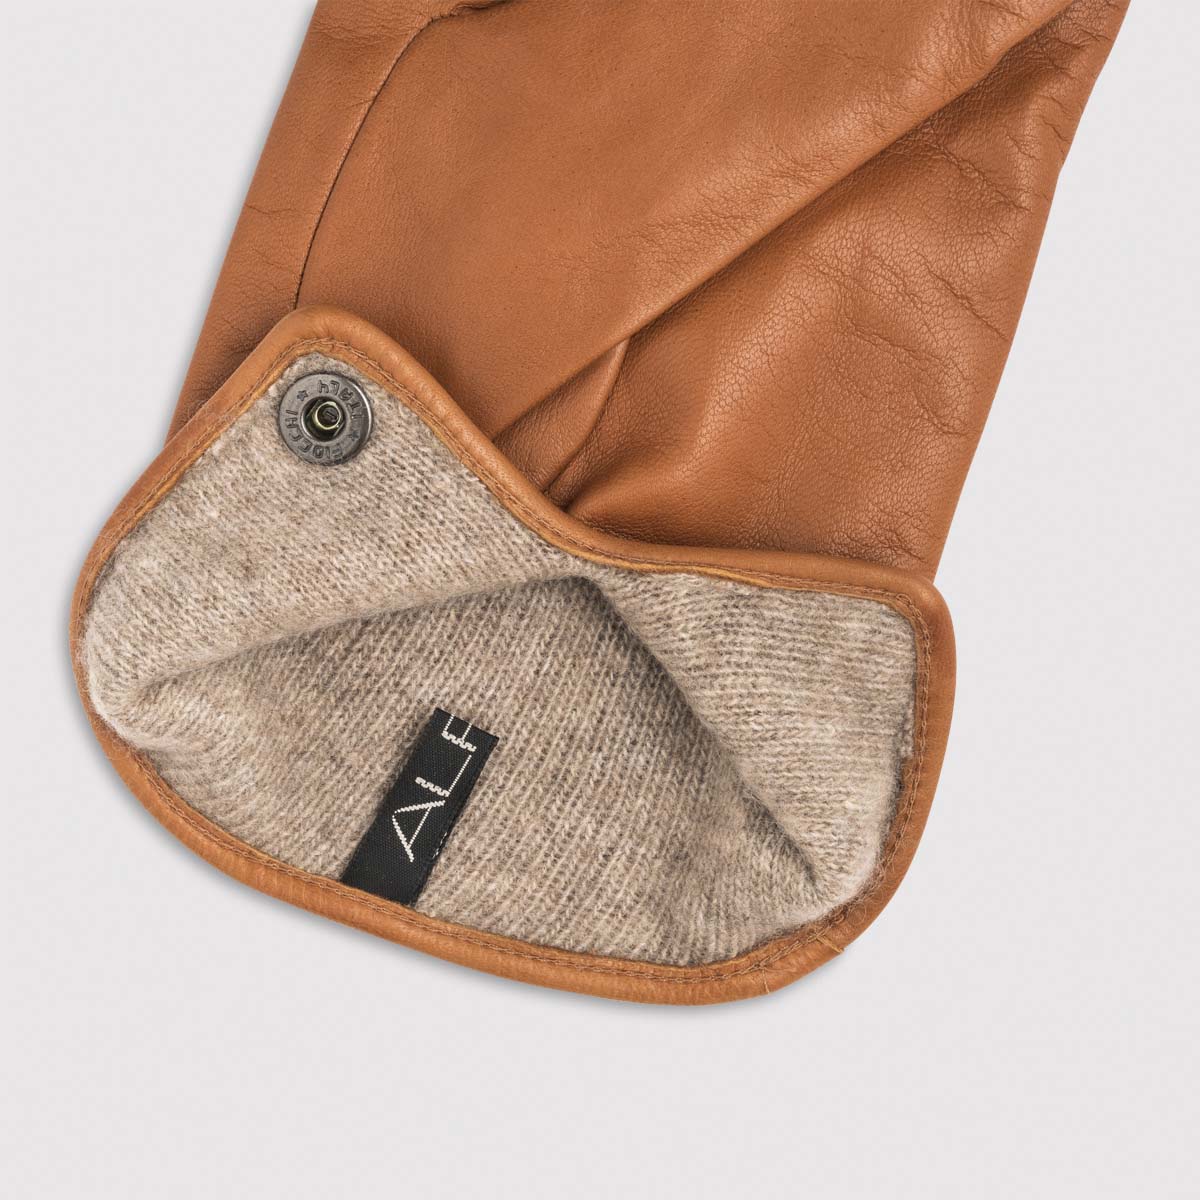 Nappa Leather Glove with Wool Lining and Button Detail in Camel Alpo Guanti on sale 2022 2